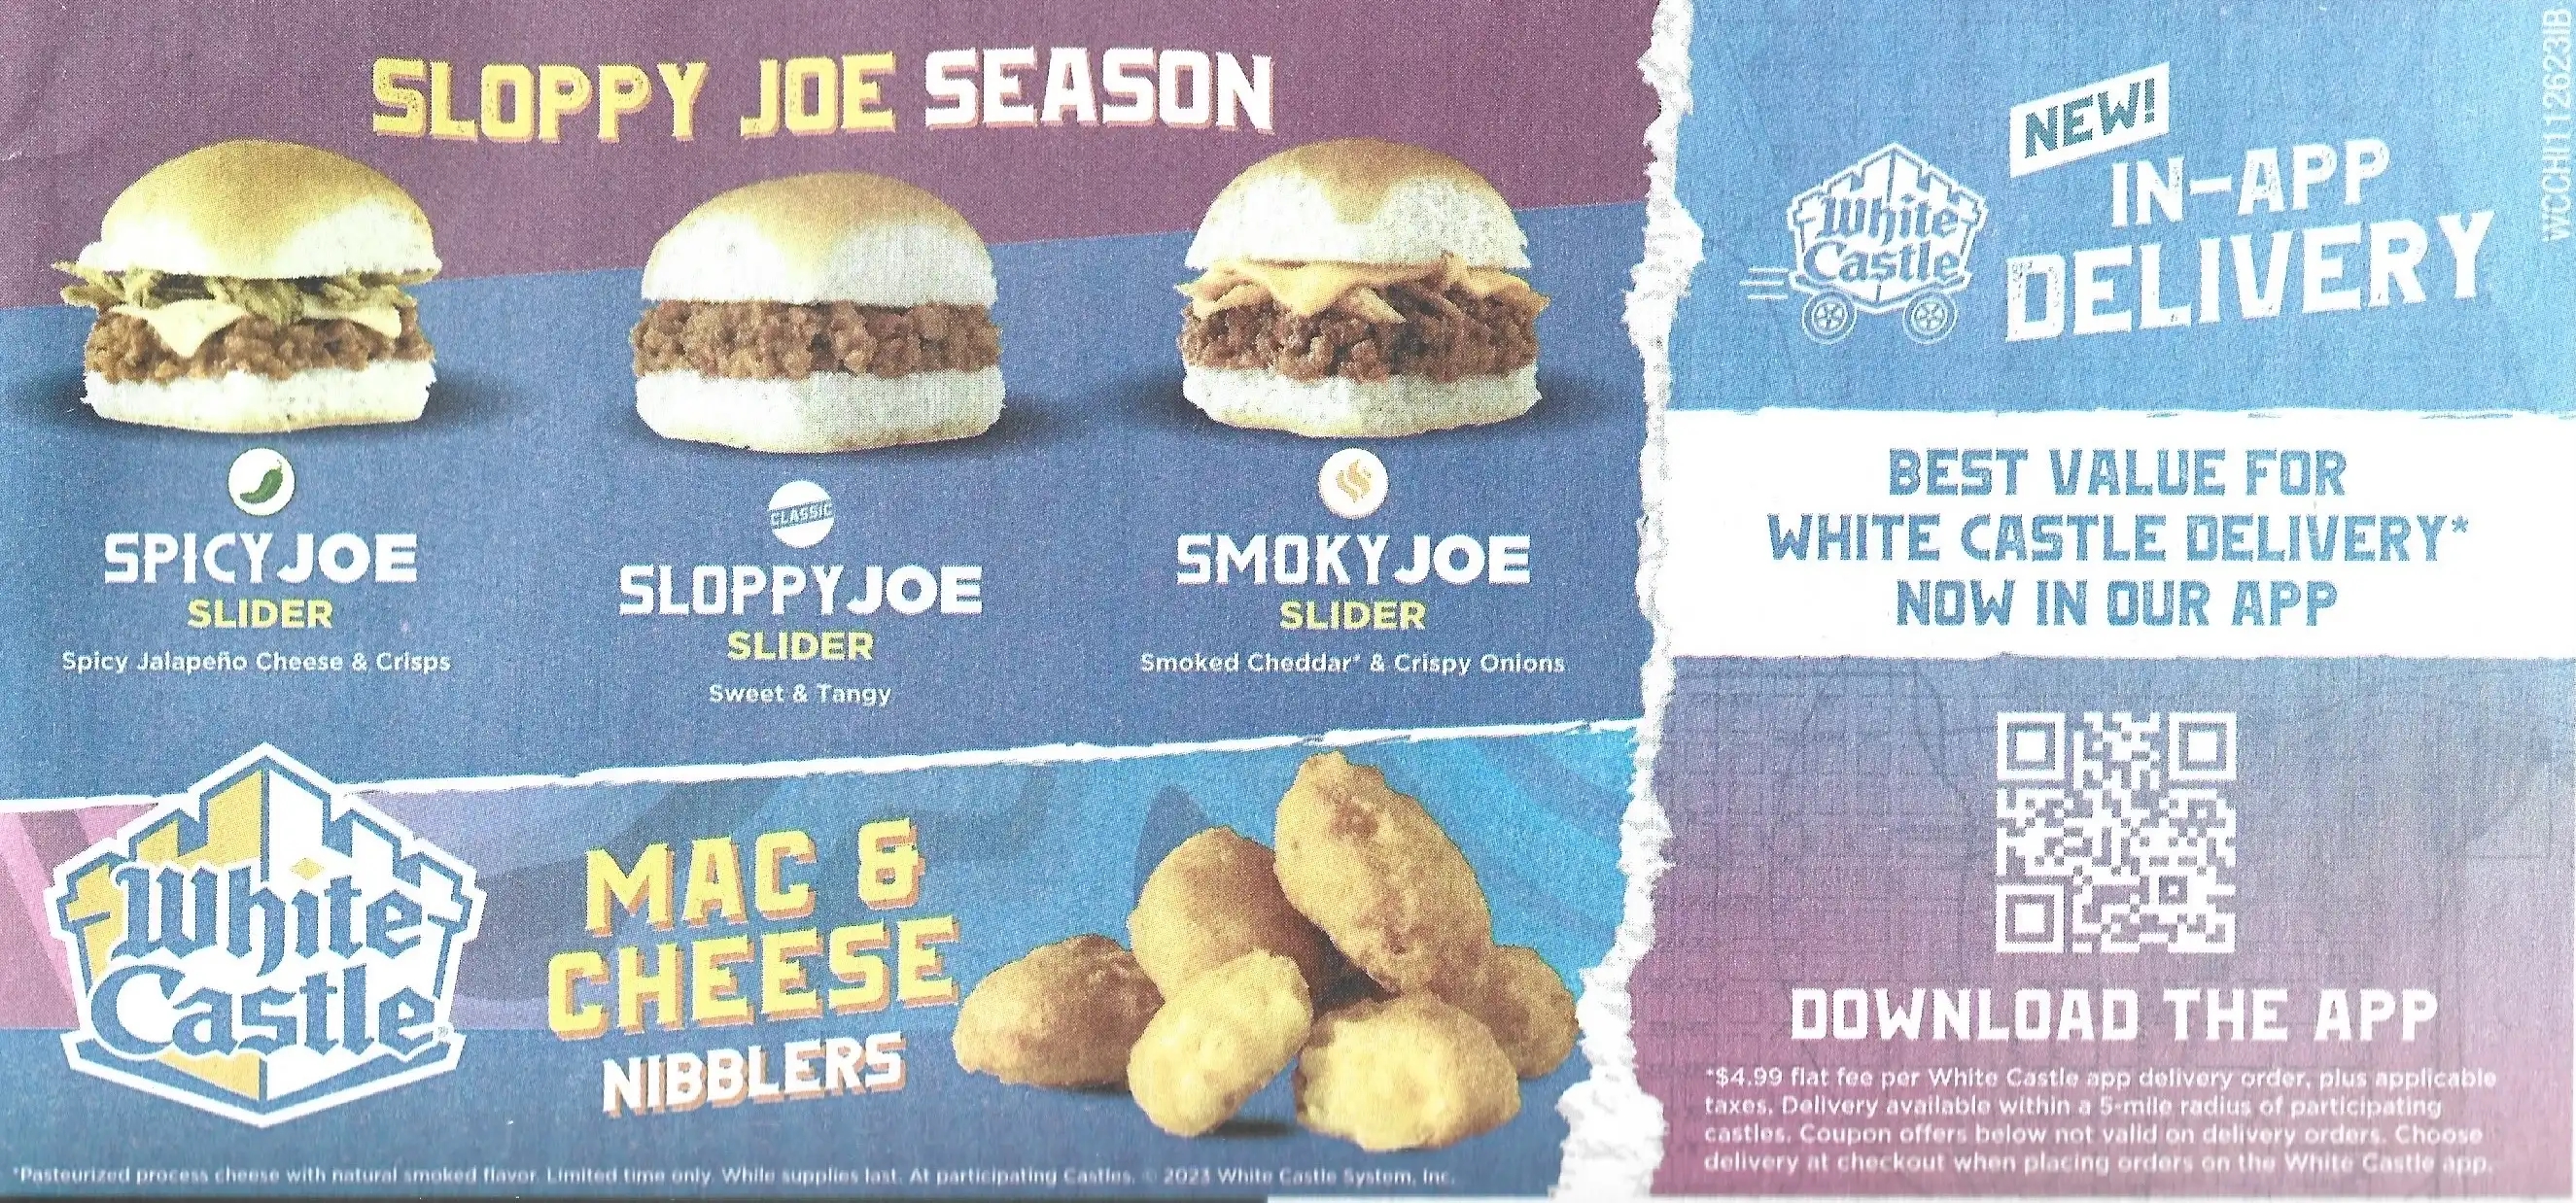 White Castle Mailer Coupons - Expires 12/31/2023 Cover